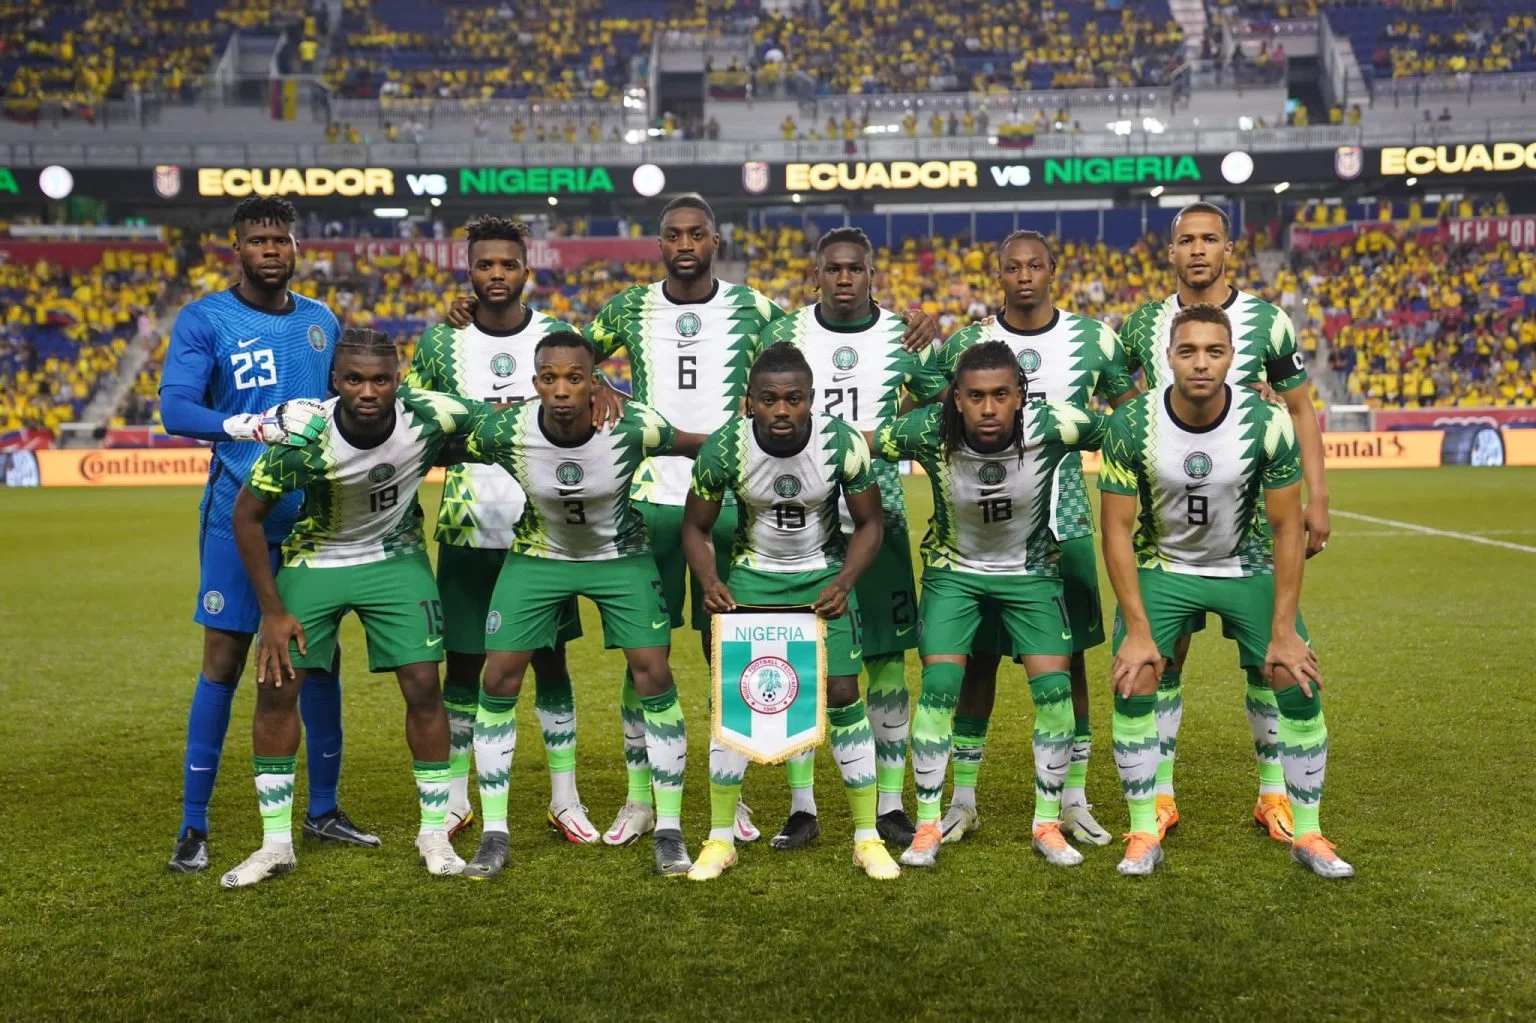 UCL: Super Eagles stars gear up for tough group stage contest